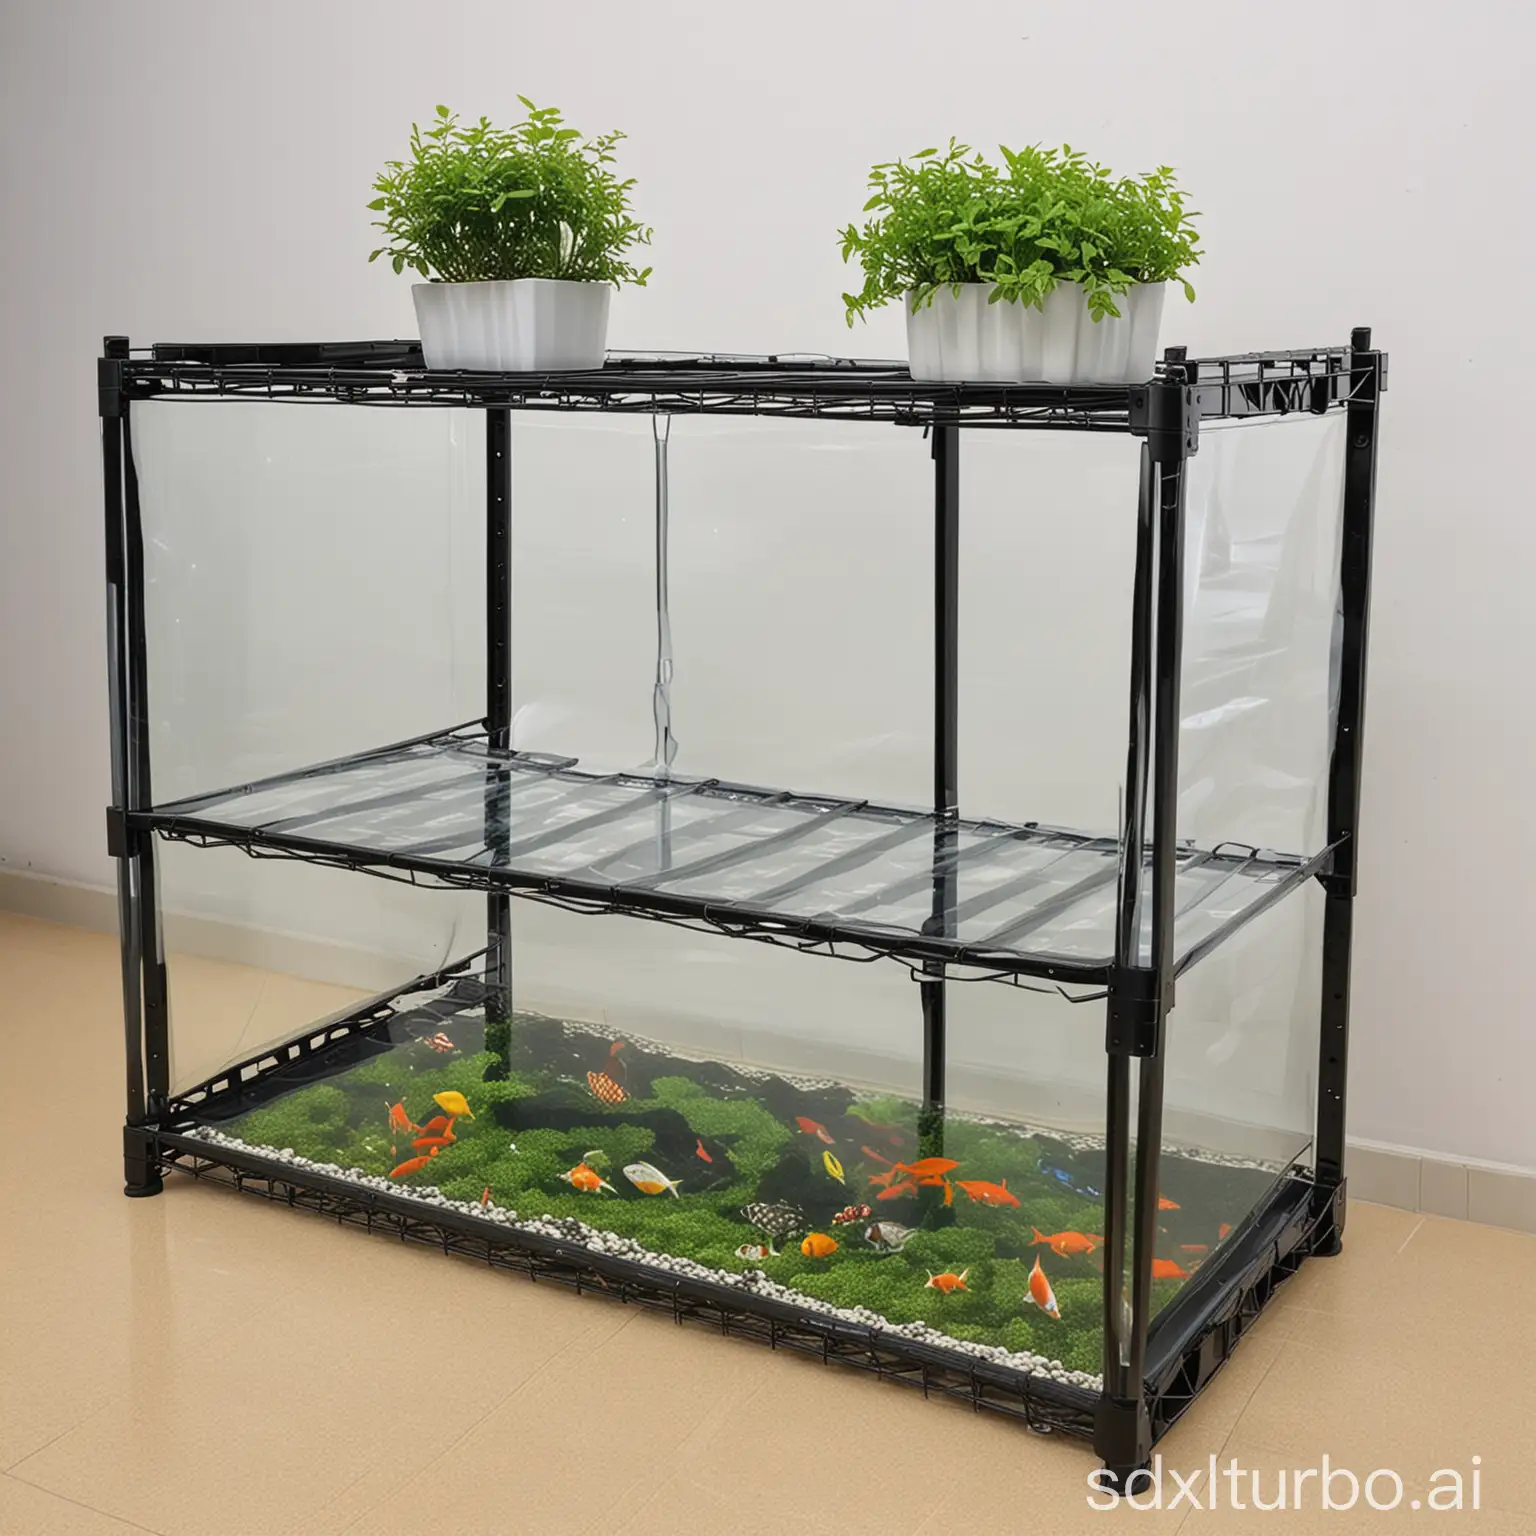 Double-layer fish tank storage rack, size 2000*2000, highlighting the stability and durability of the product, demonstrating the sturdy construction and supporting capacity of the product